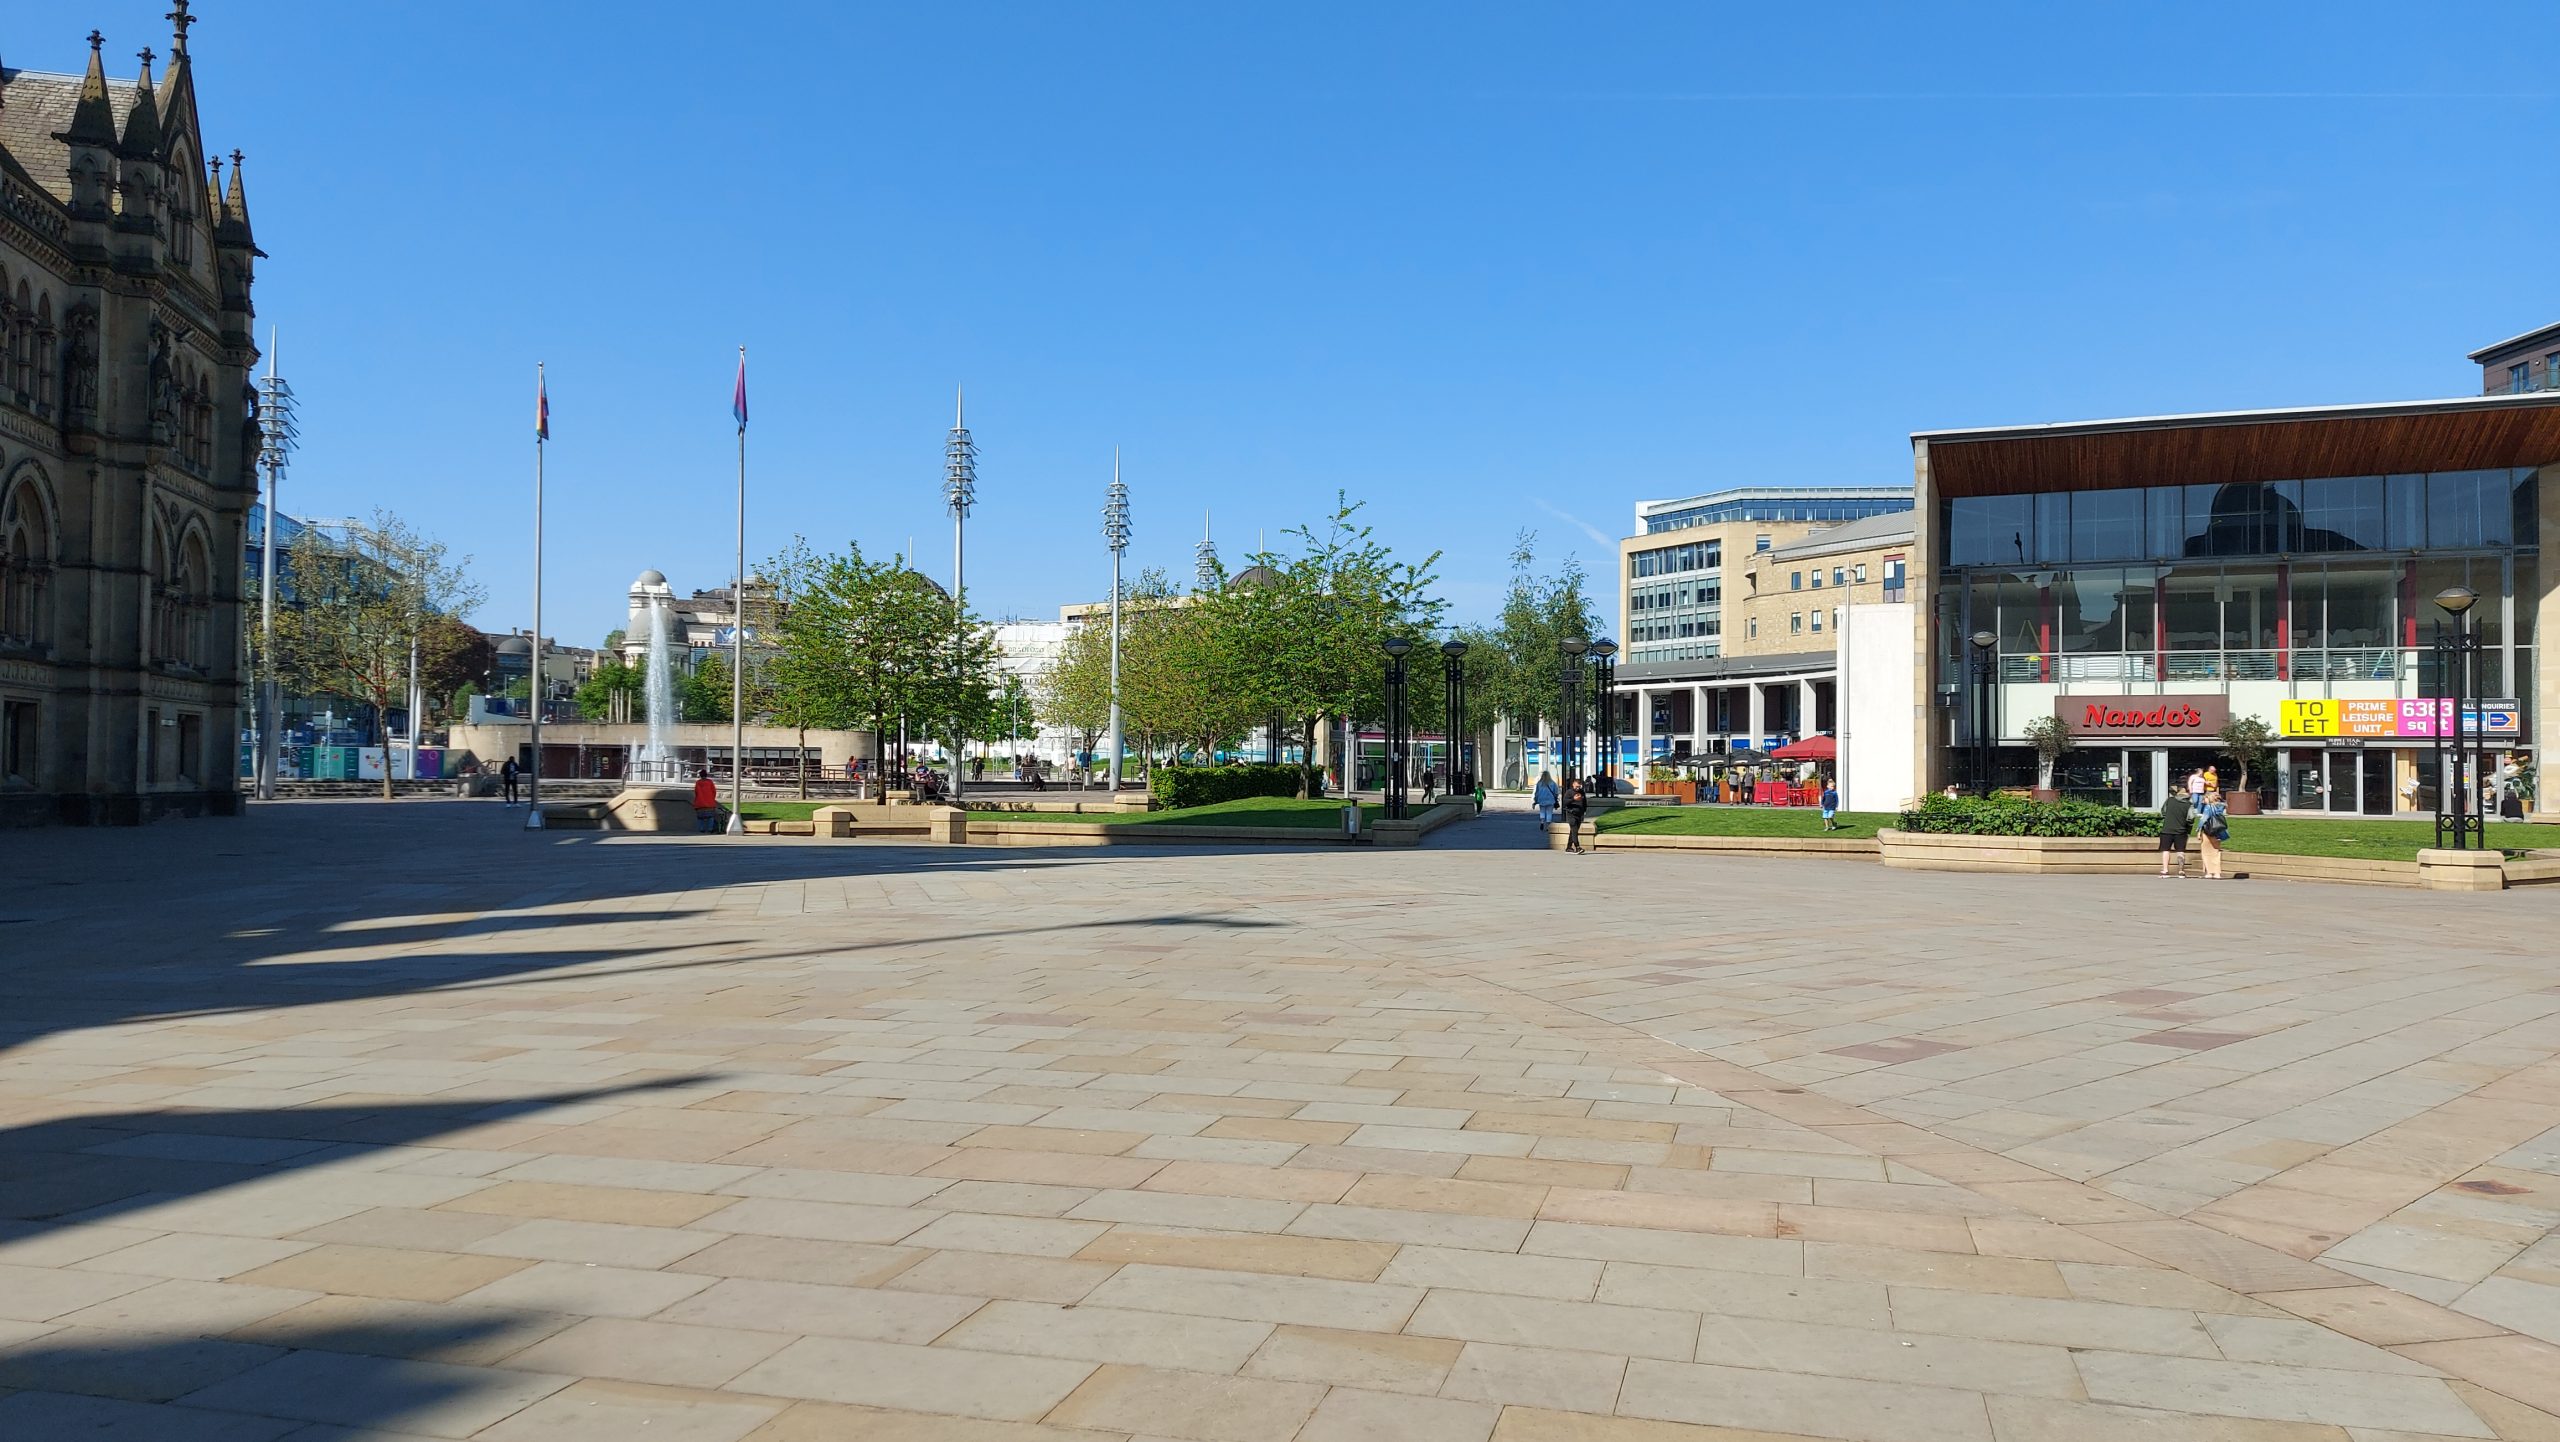 A photo of the City Park in Bradford City Centre. There is part of Bradford City Hall on the left and a restaurant on the right.